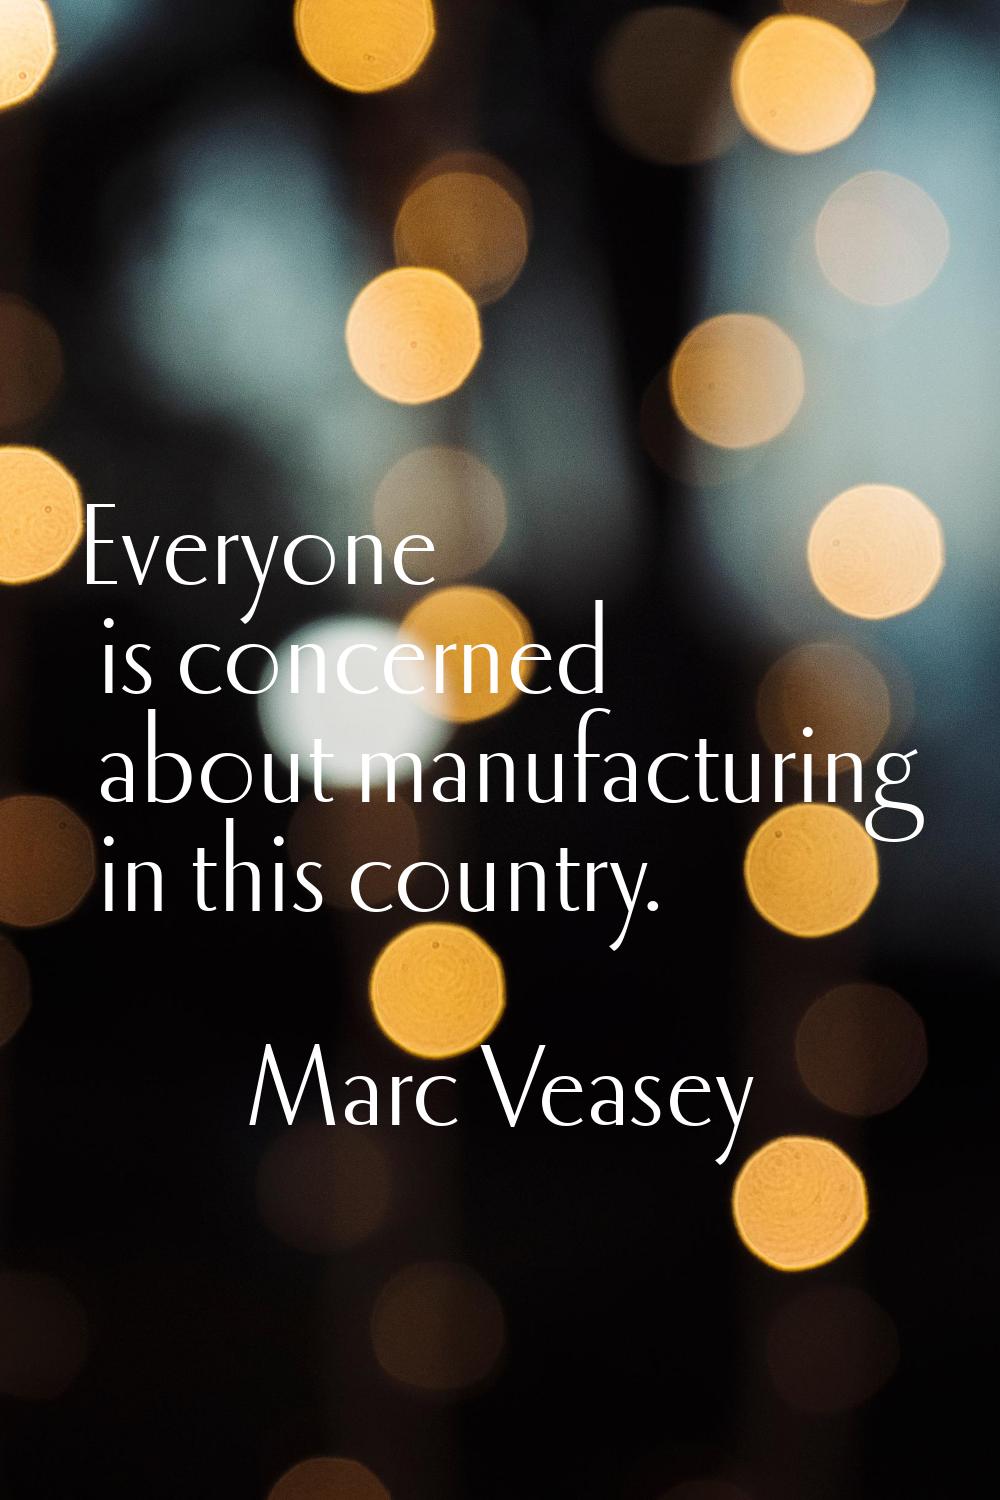 Everyone is concerned about manufacturing in this country.